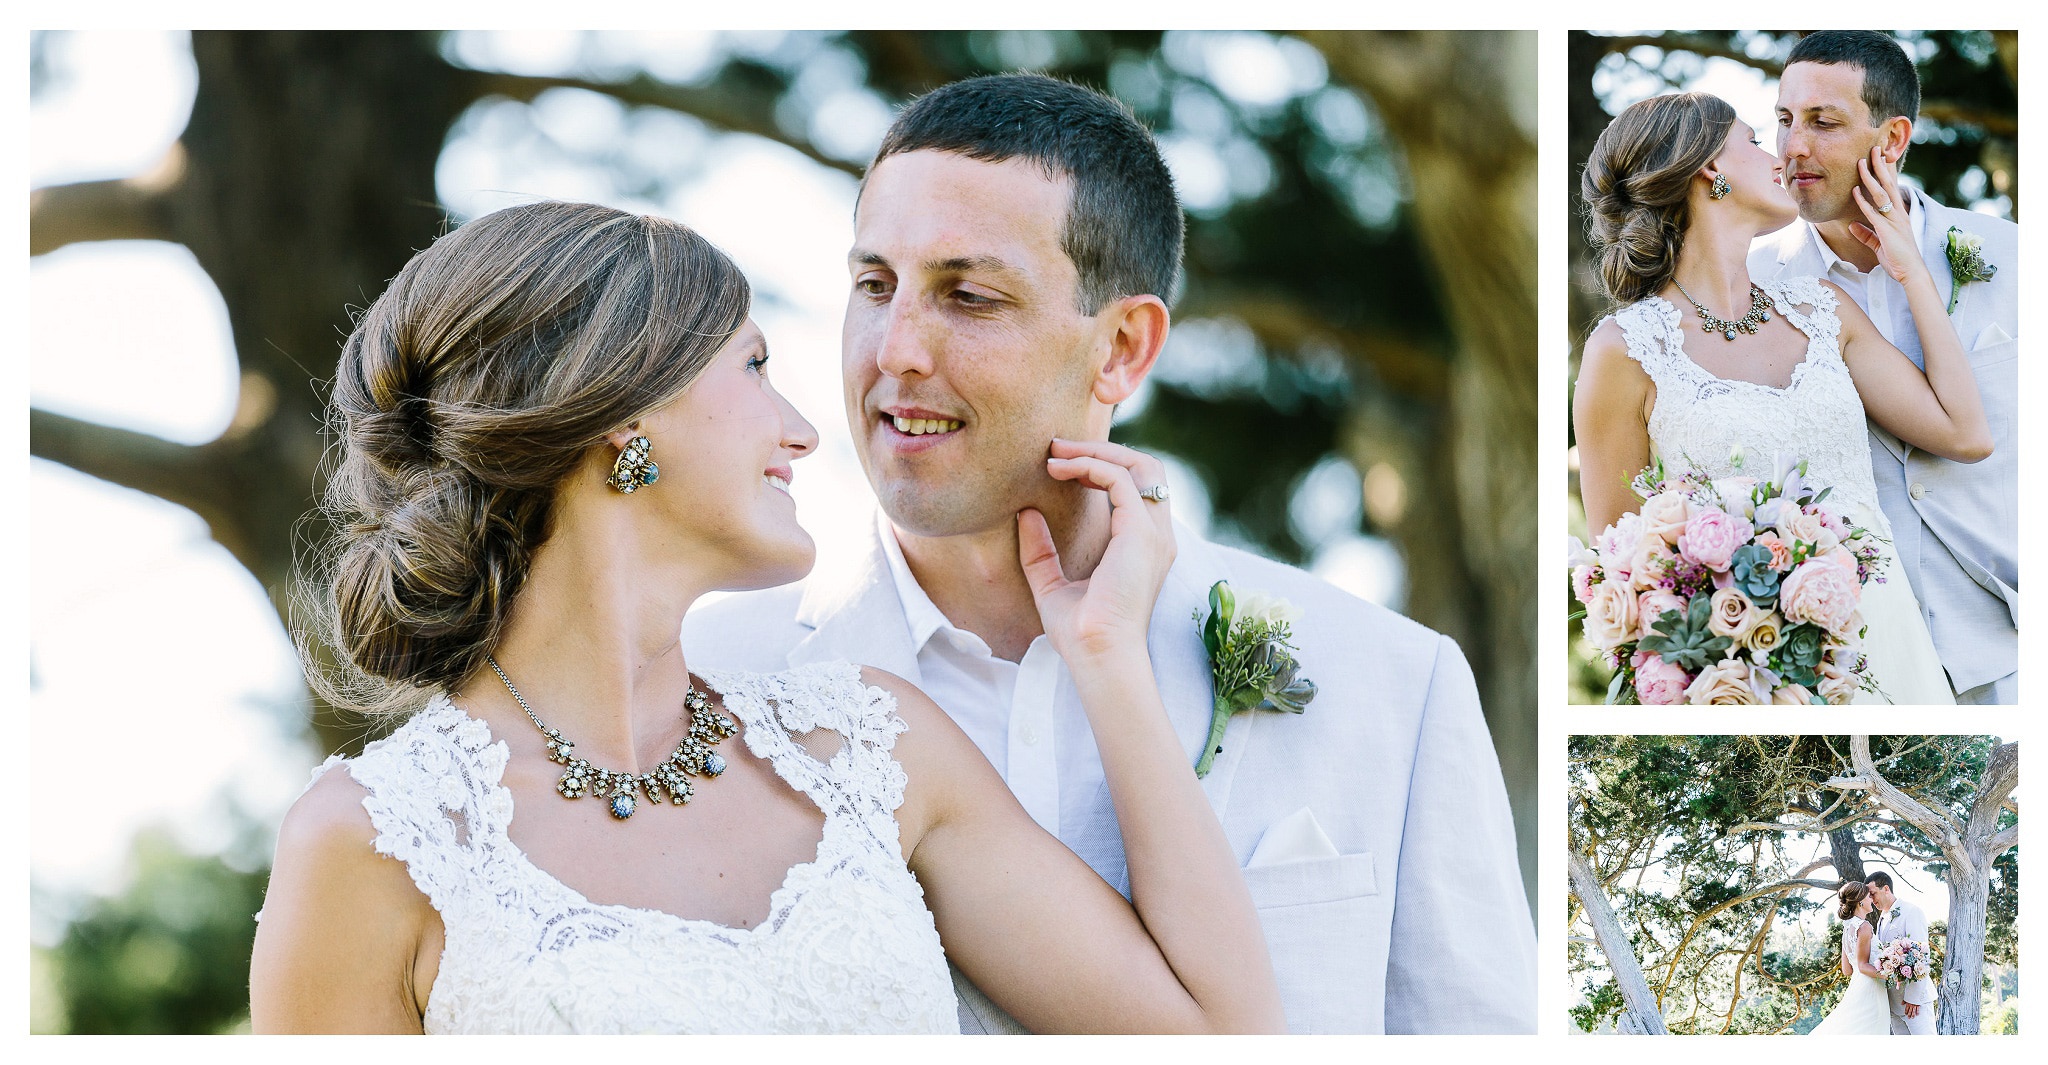 You can see the love in their eyes, Kristie and Grant posing outdoors together, Myrtle Beach wedding - Venue - Beach House Gulf Stream Breeze, Beach Realty Catering and Cake - Buttercream Cakes and Catering, LLC Flowers - Callas Florist Event Rentals - Event Works DJ - Scott Shaw